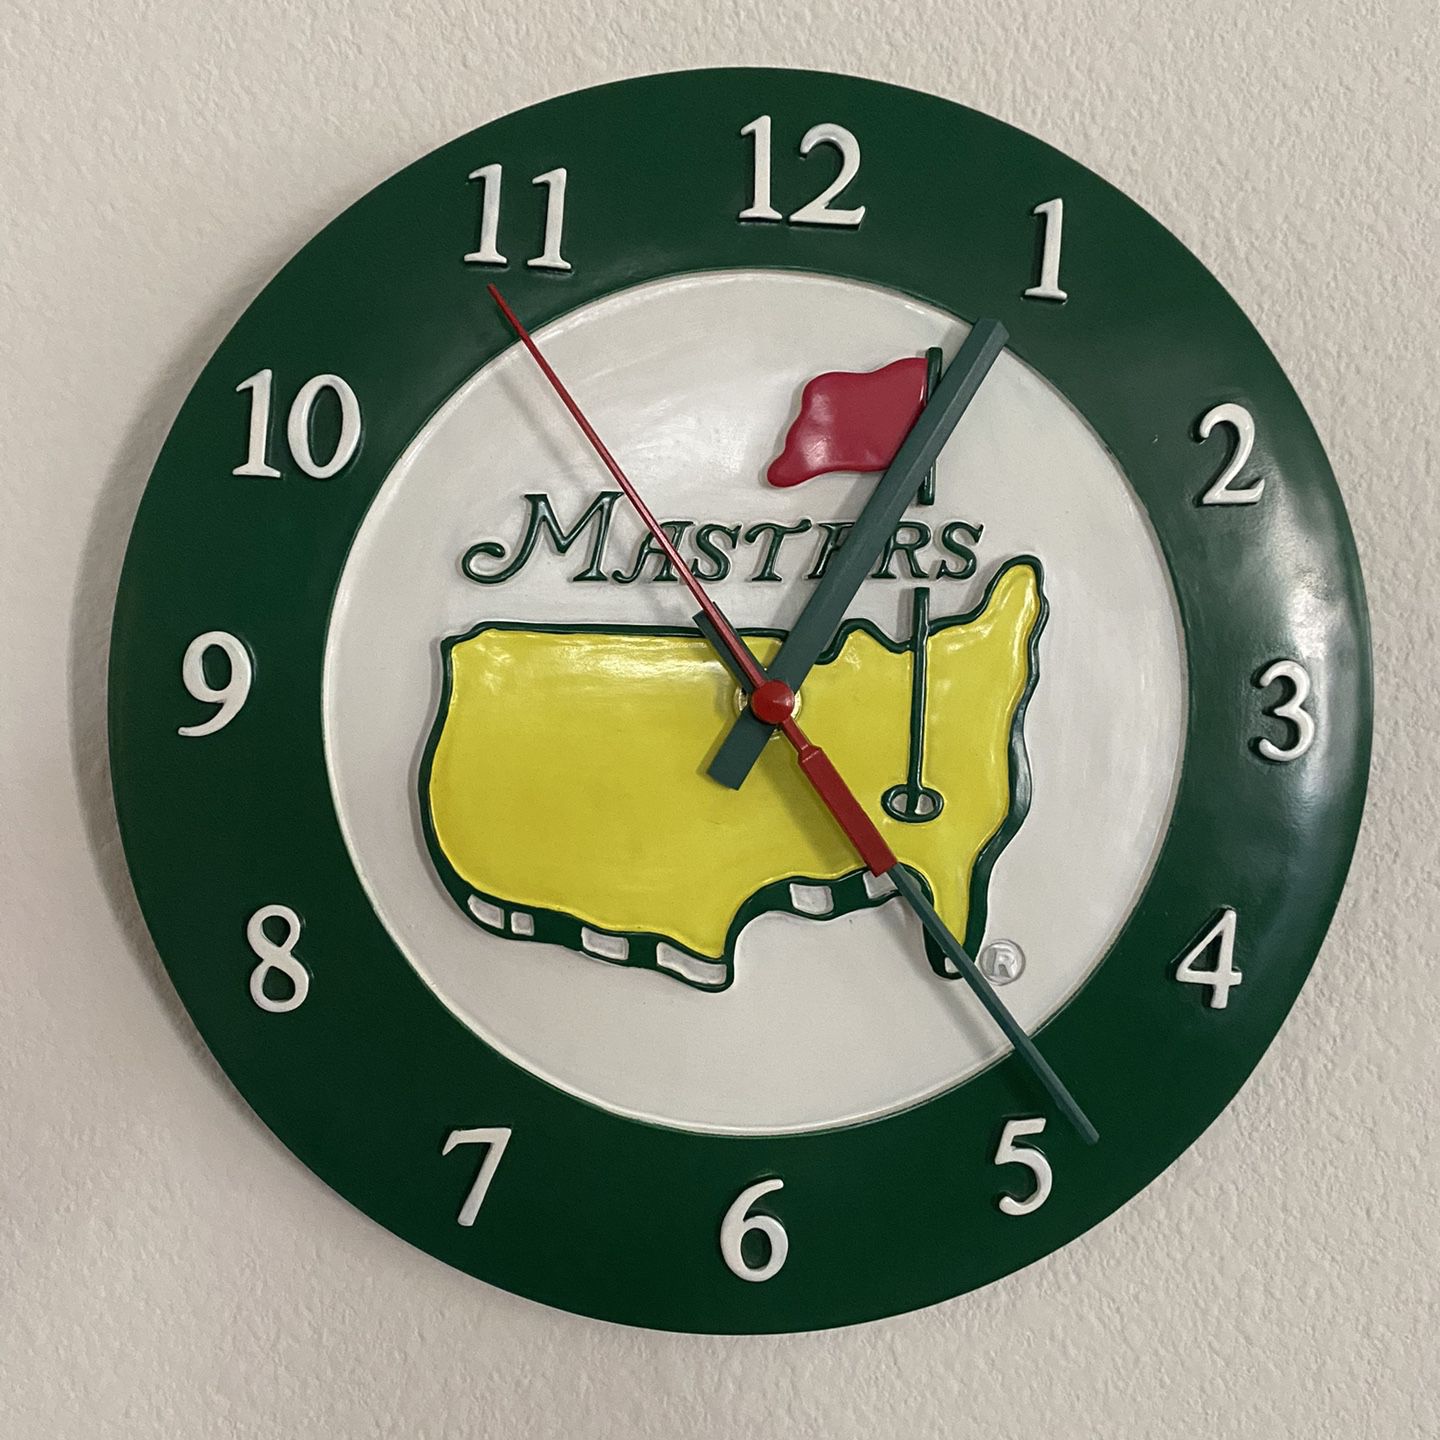 The Masters Tournament Golf Wall Clock